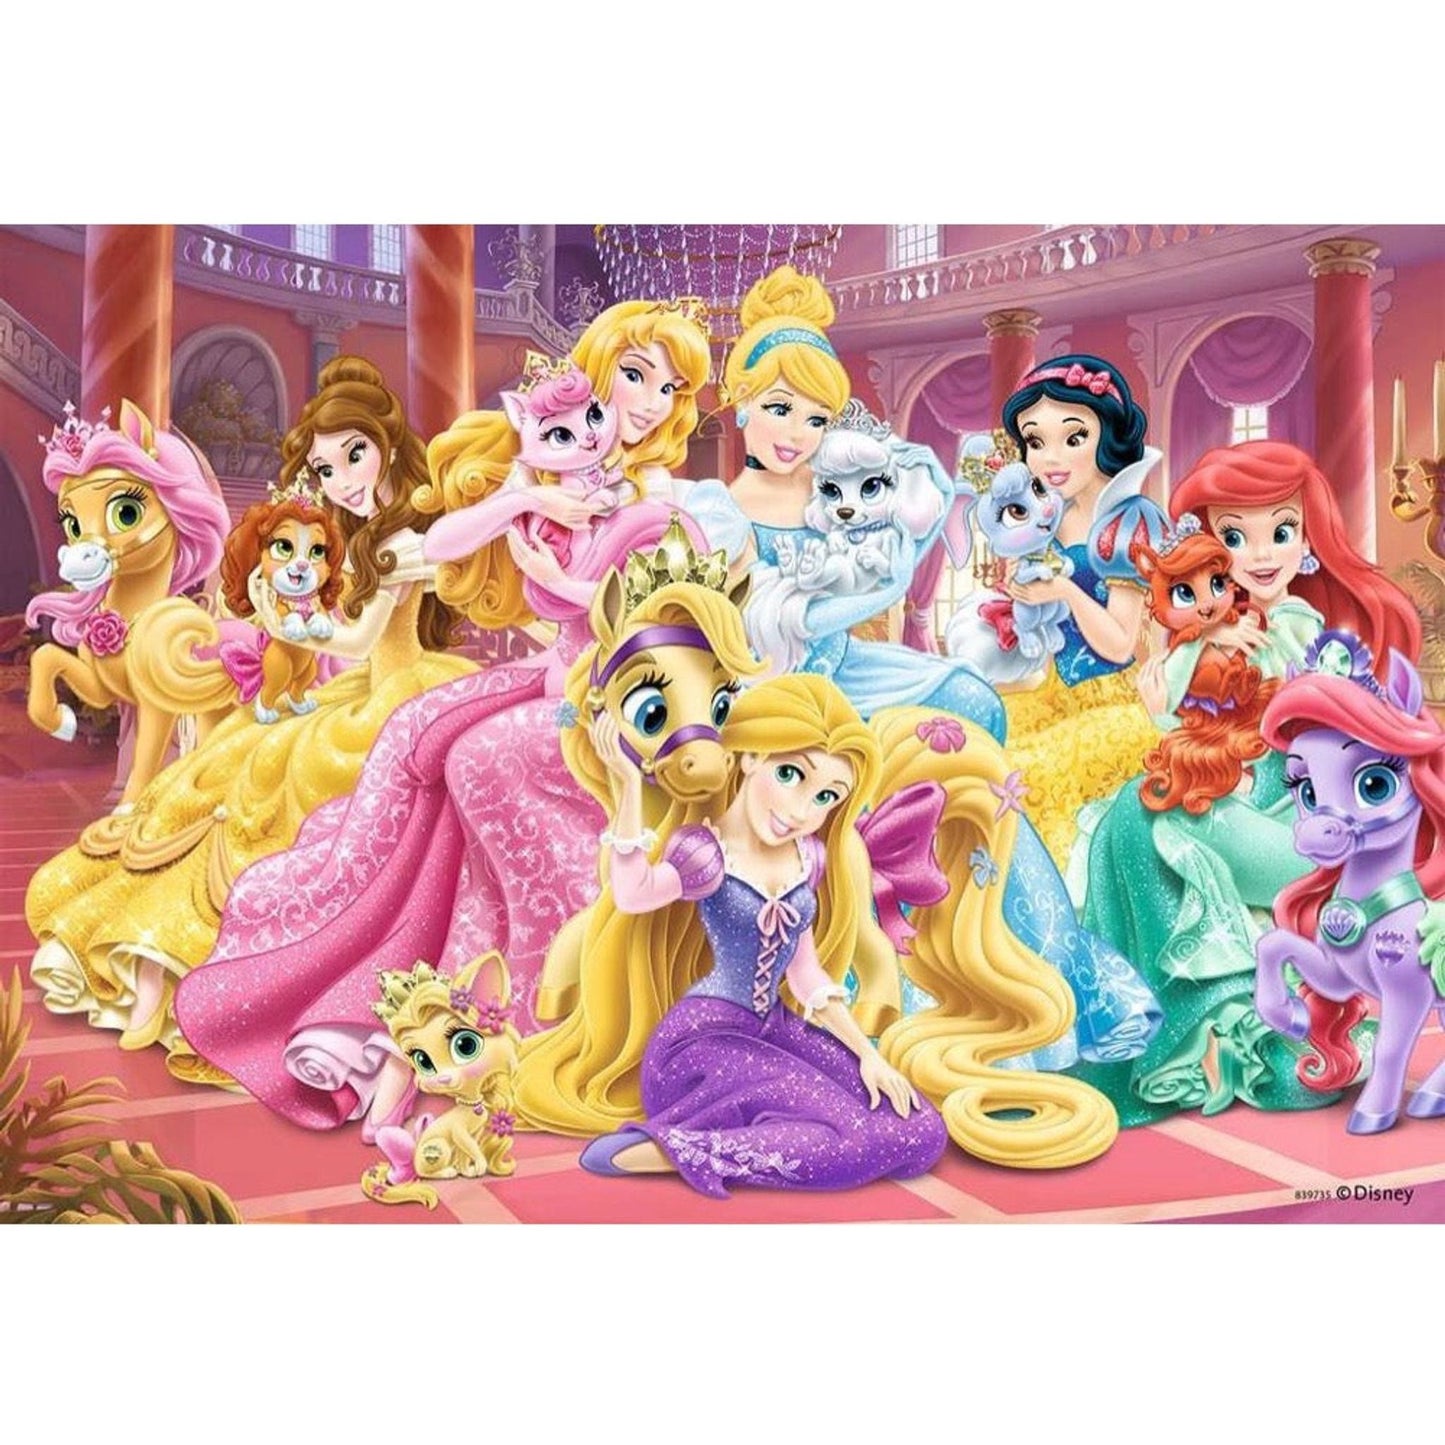 Ravensburger - Best Friends of the Princess 2x24pc - Toybox Tales